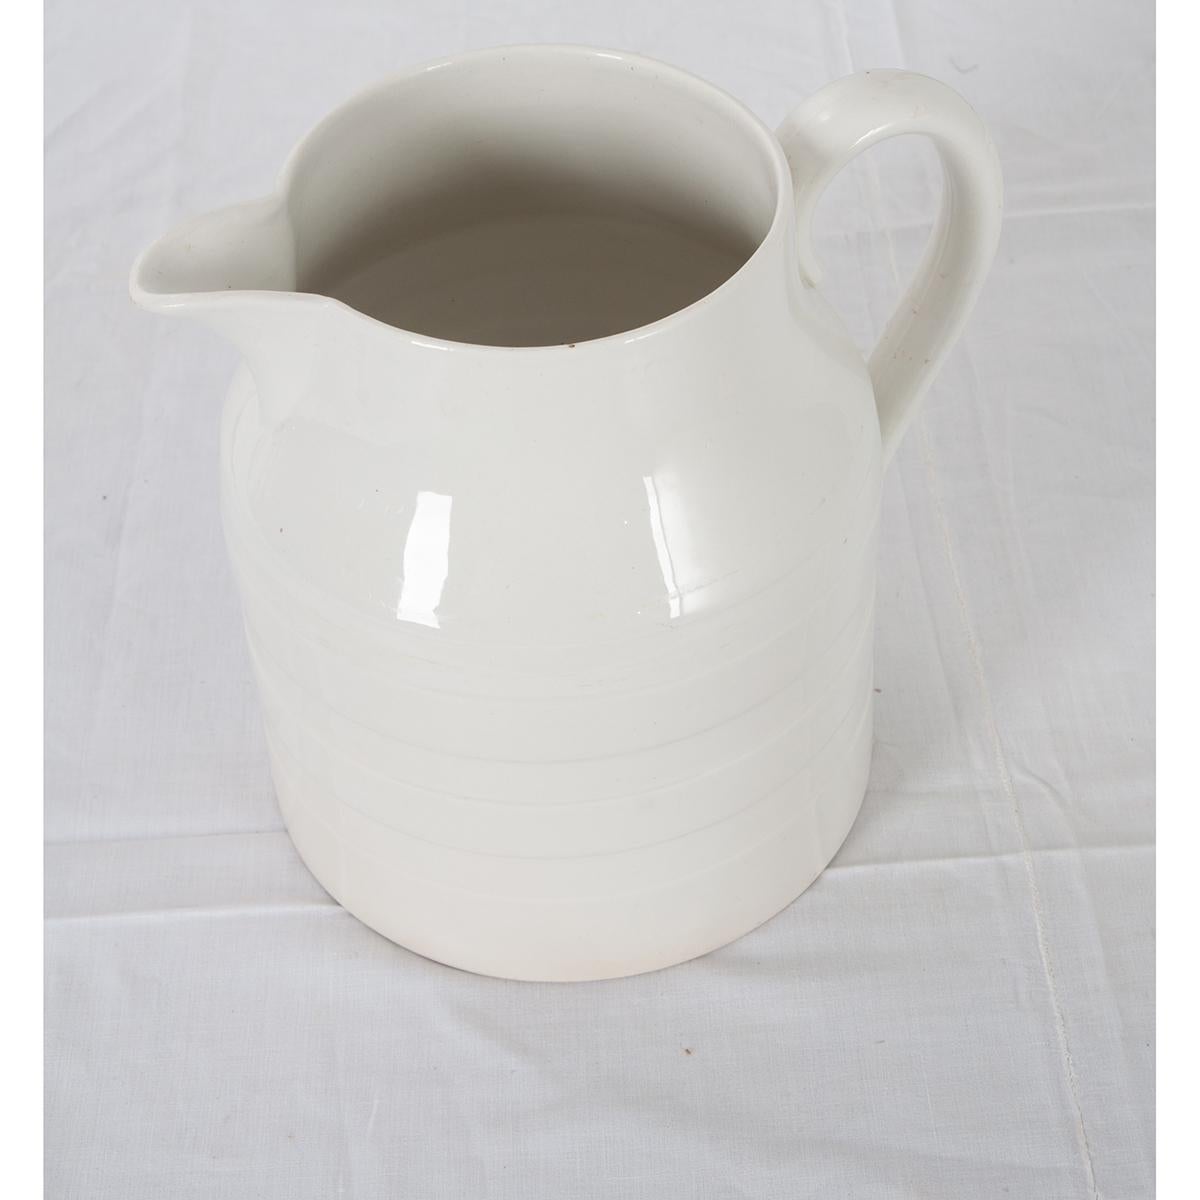 A wonderful early 20th century white ironstone pitcher, from Staffordshire, England, circa 1920. Having raised stripes that encircle the vessel, this mono-chromed white pitcher will add a touch of rustic sophistication to any room. Stamped GJ &